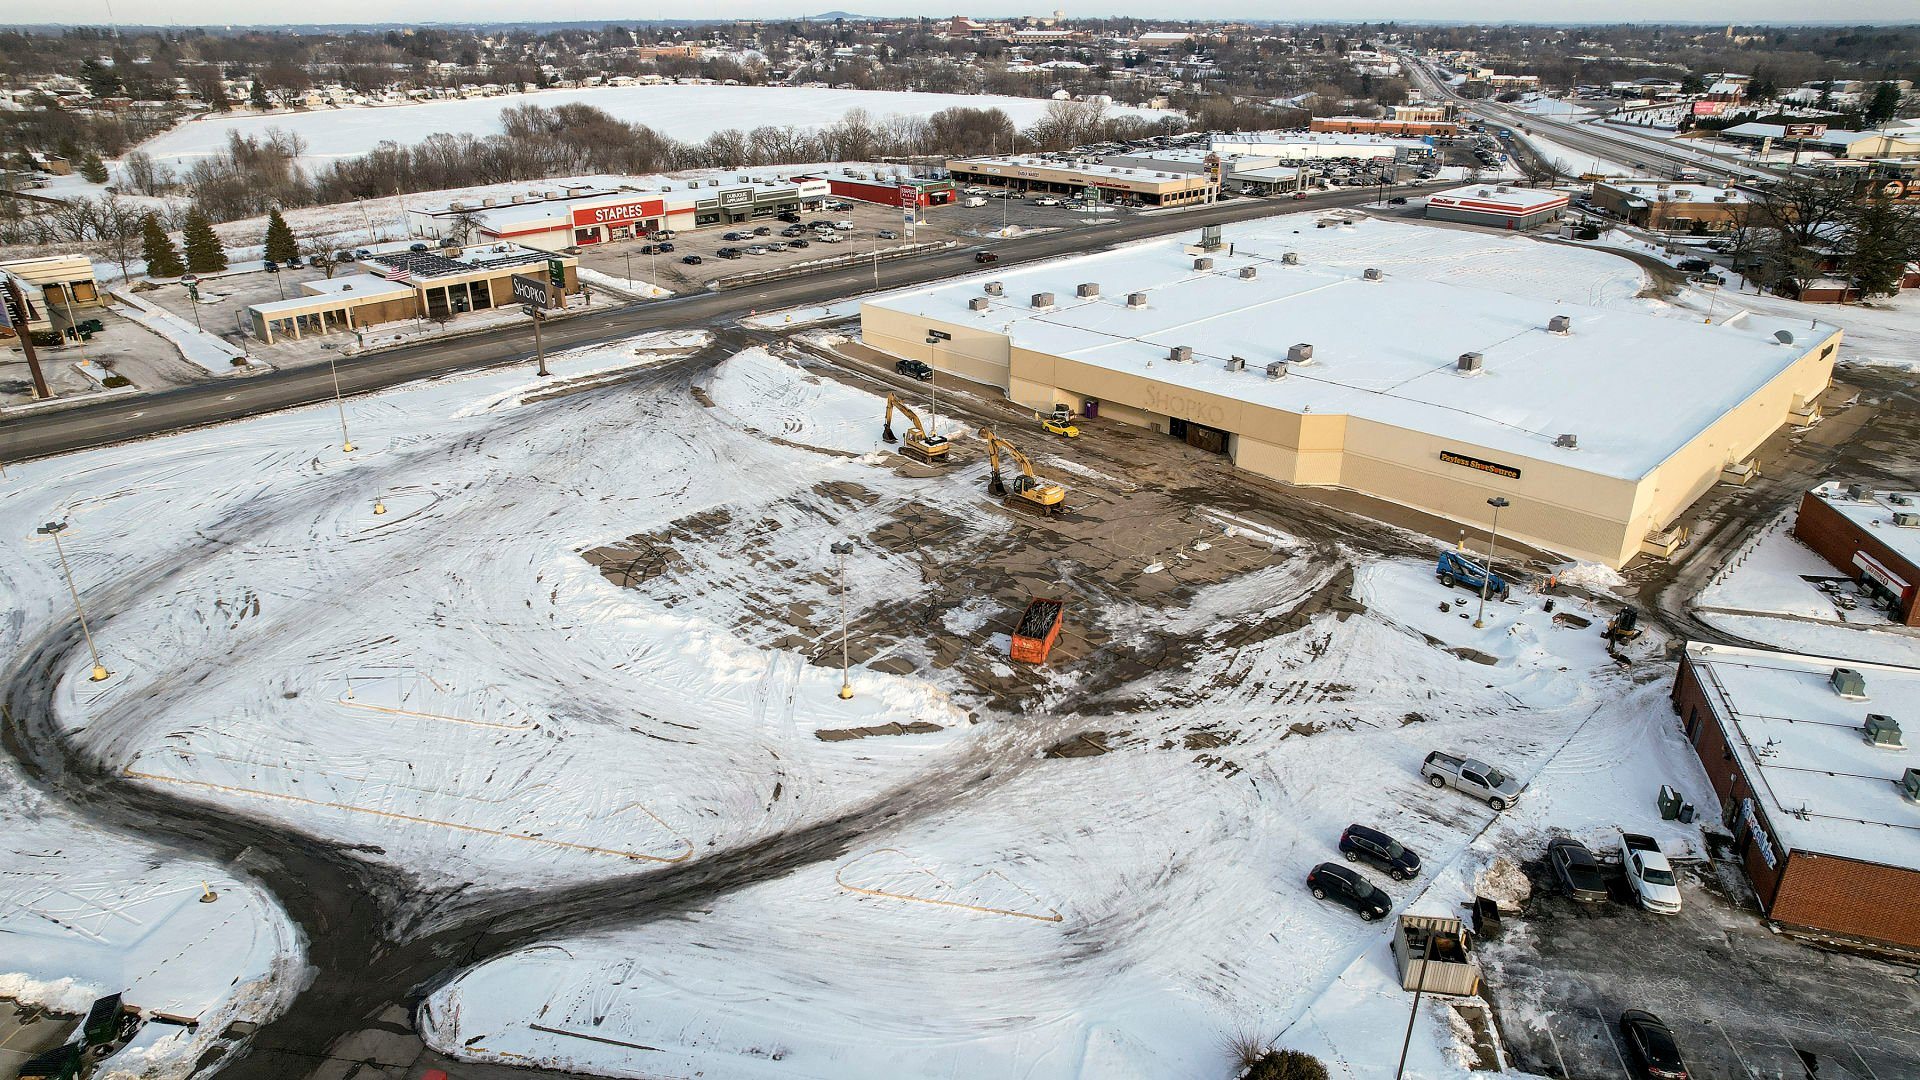 Collins Community Credit Union purchased land at 255 John F. Kennedy Road to build a second Dubuque location. The credit union currently has a branch at 4855 Asbury Road, but a company official says it has outgrown that site.    PHOTO CREDIT: Dave Kettering